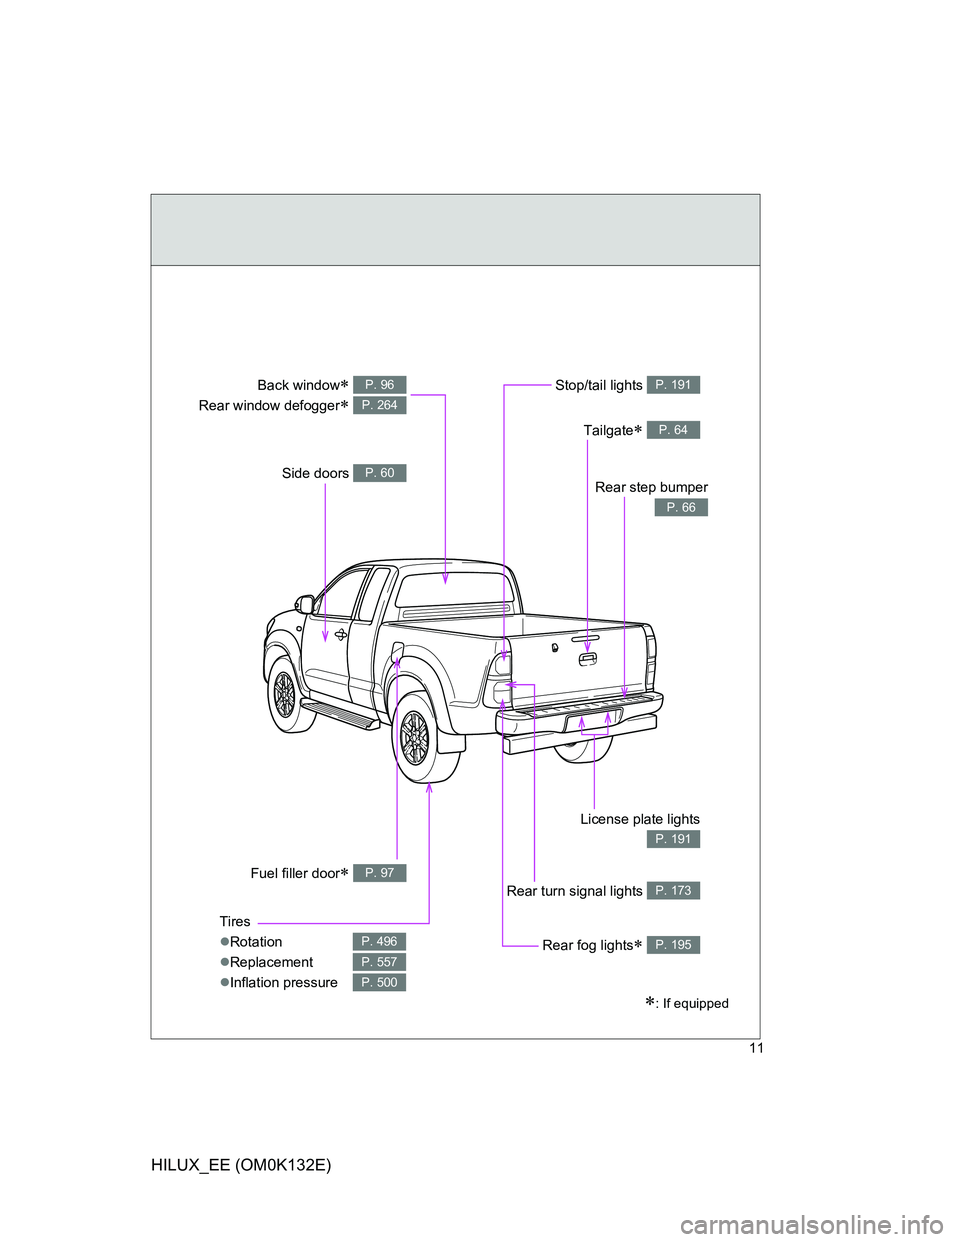 TOYOTA HILUX 2012  Owners Manual (in English) 11
HILUX_EE (OM0K132E)
Fuel filler door P. 97
Back window 
Rear window defogger
 
P. 96
P. 264
: If equipped
Stop/tail lights P. 191
Tailgate P. 64
Side doors P. 60
Tires
Rotation
�